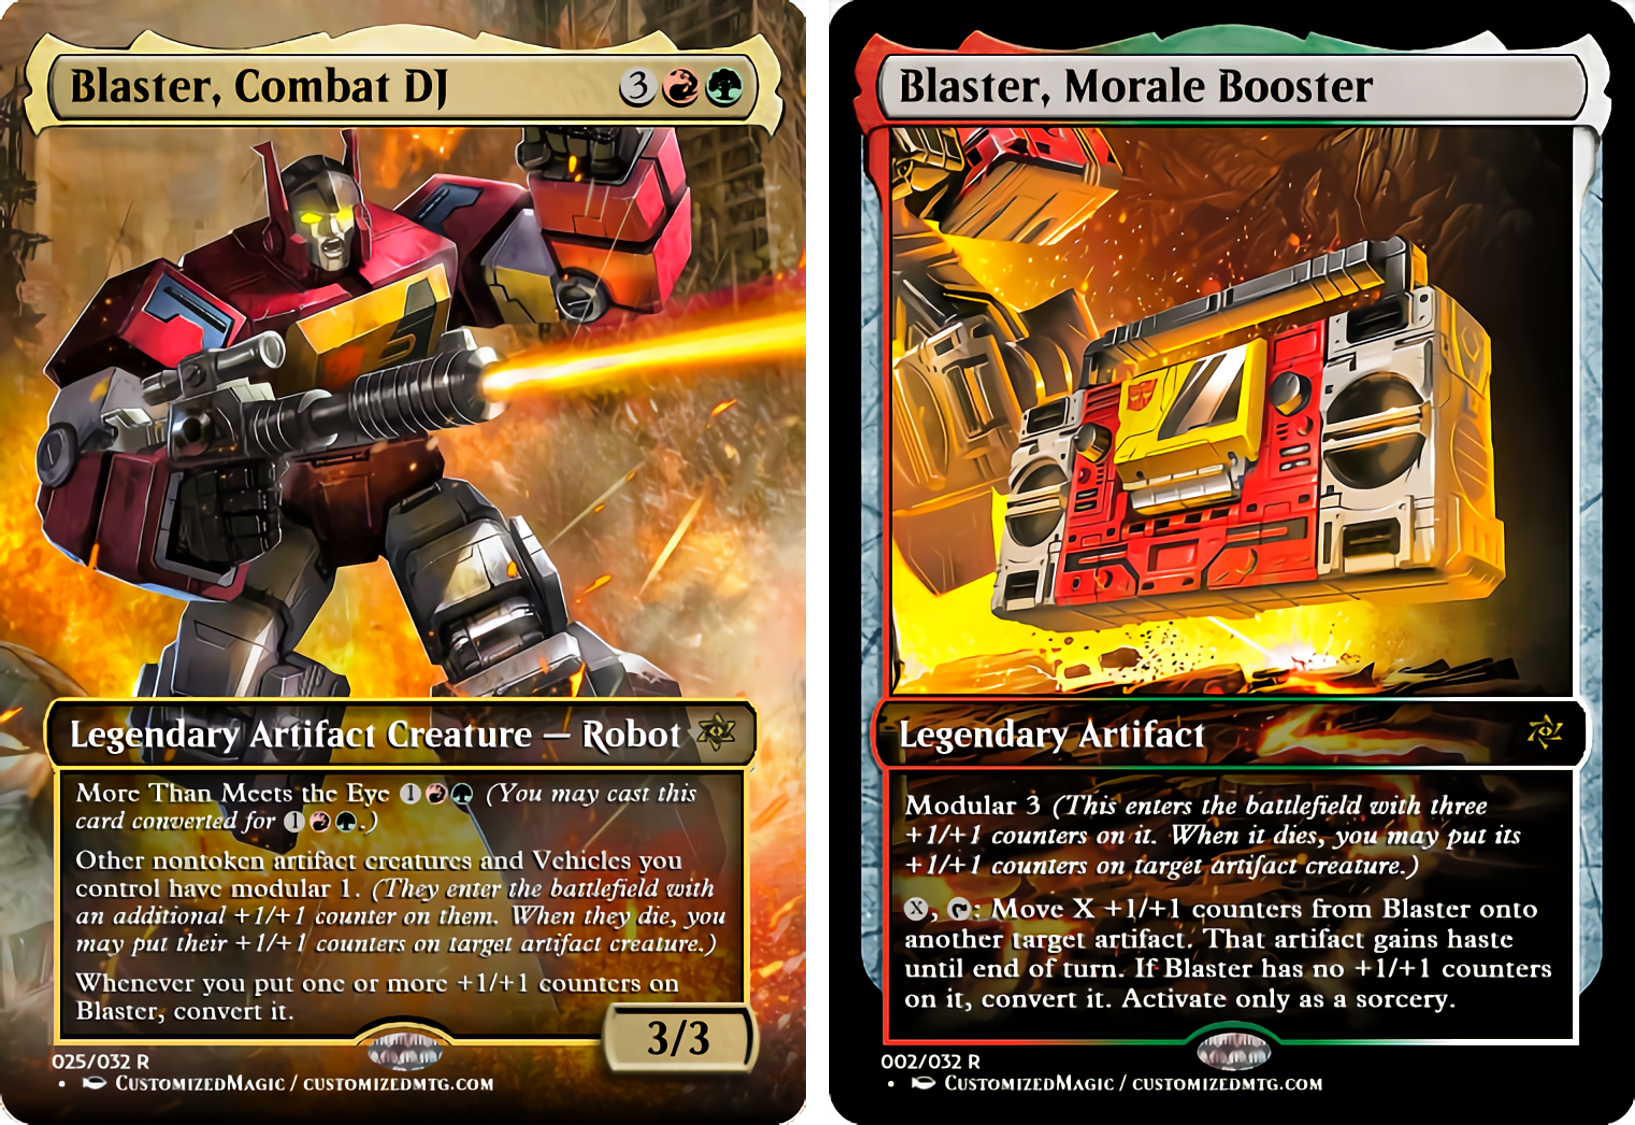 Transformers Commander Set | Blaster Combat DJ and Blaster Morale Booster | Magic the Gathering Proxy Cards